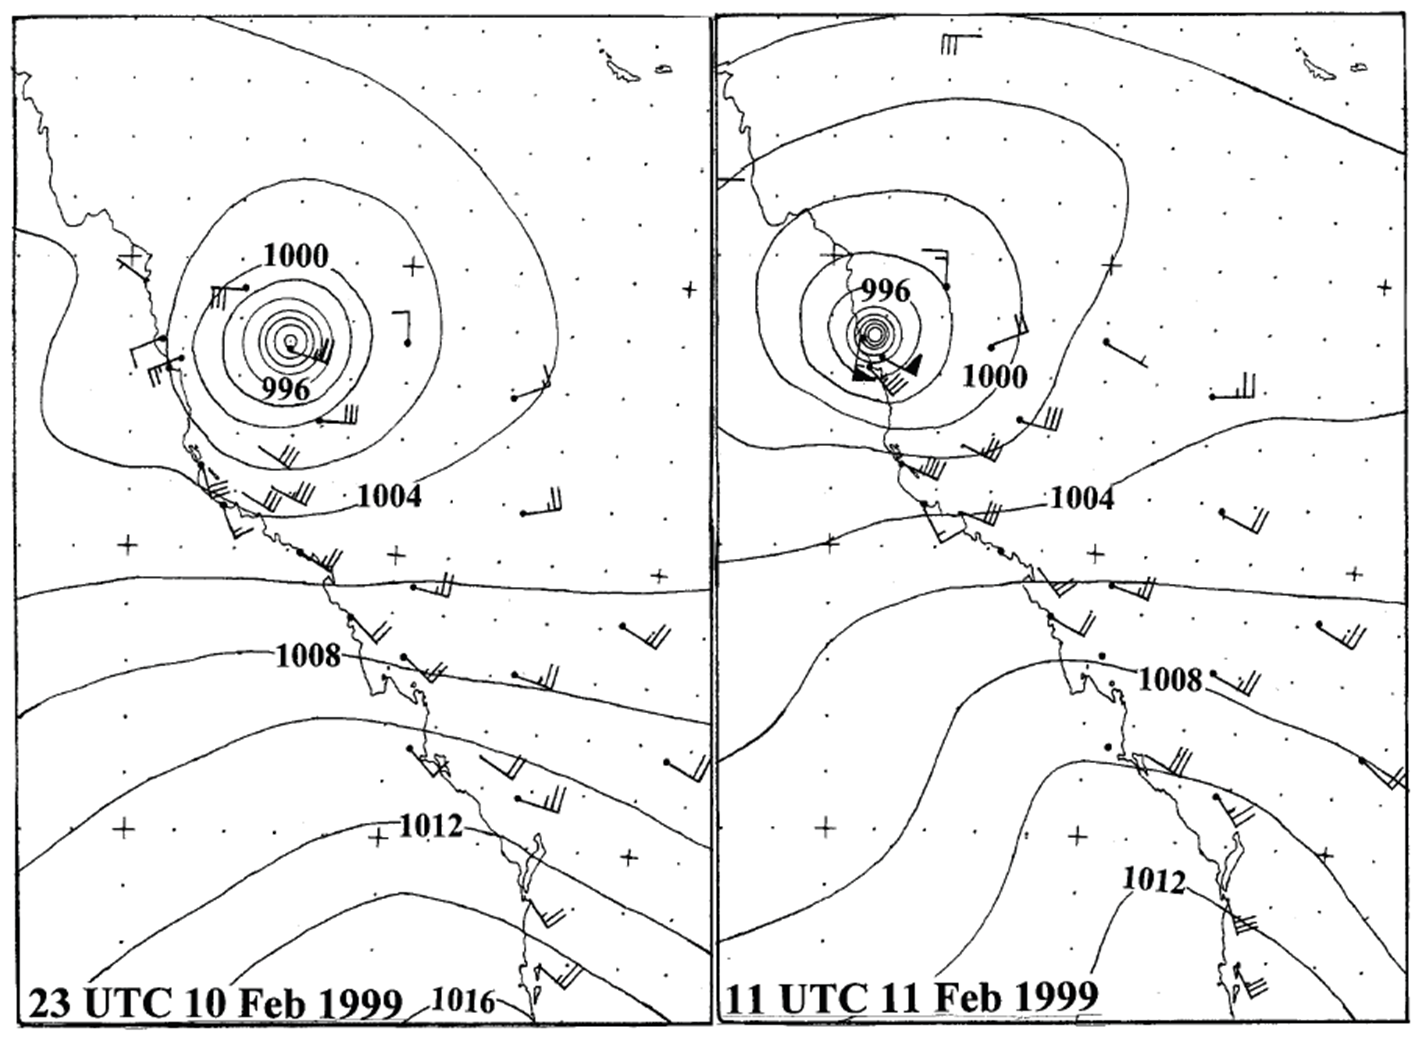 Regional mean sea level pressure analyses with wind observations from 10 February 1999